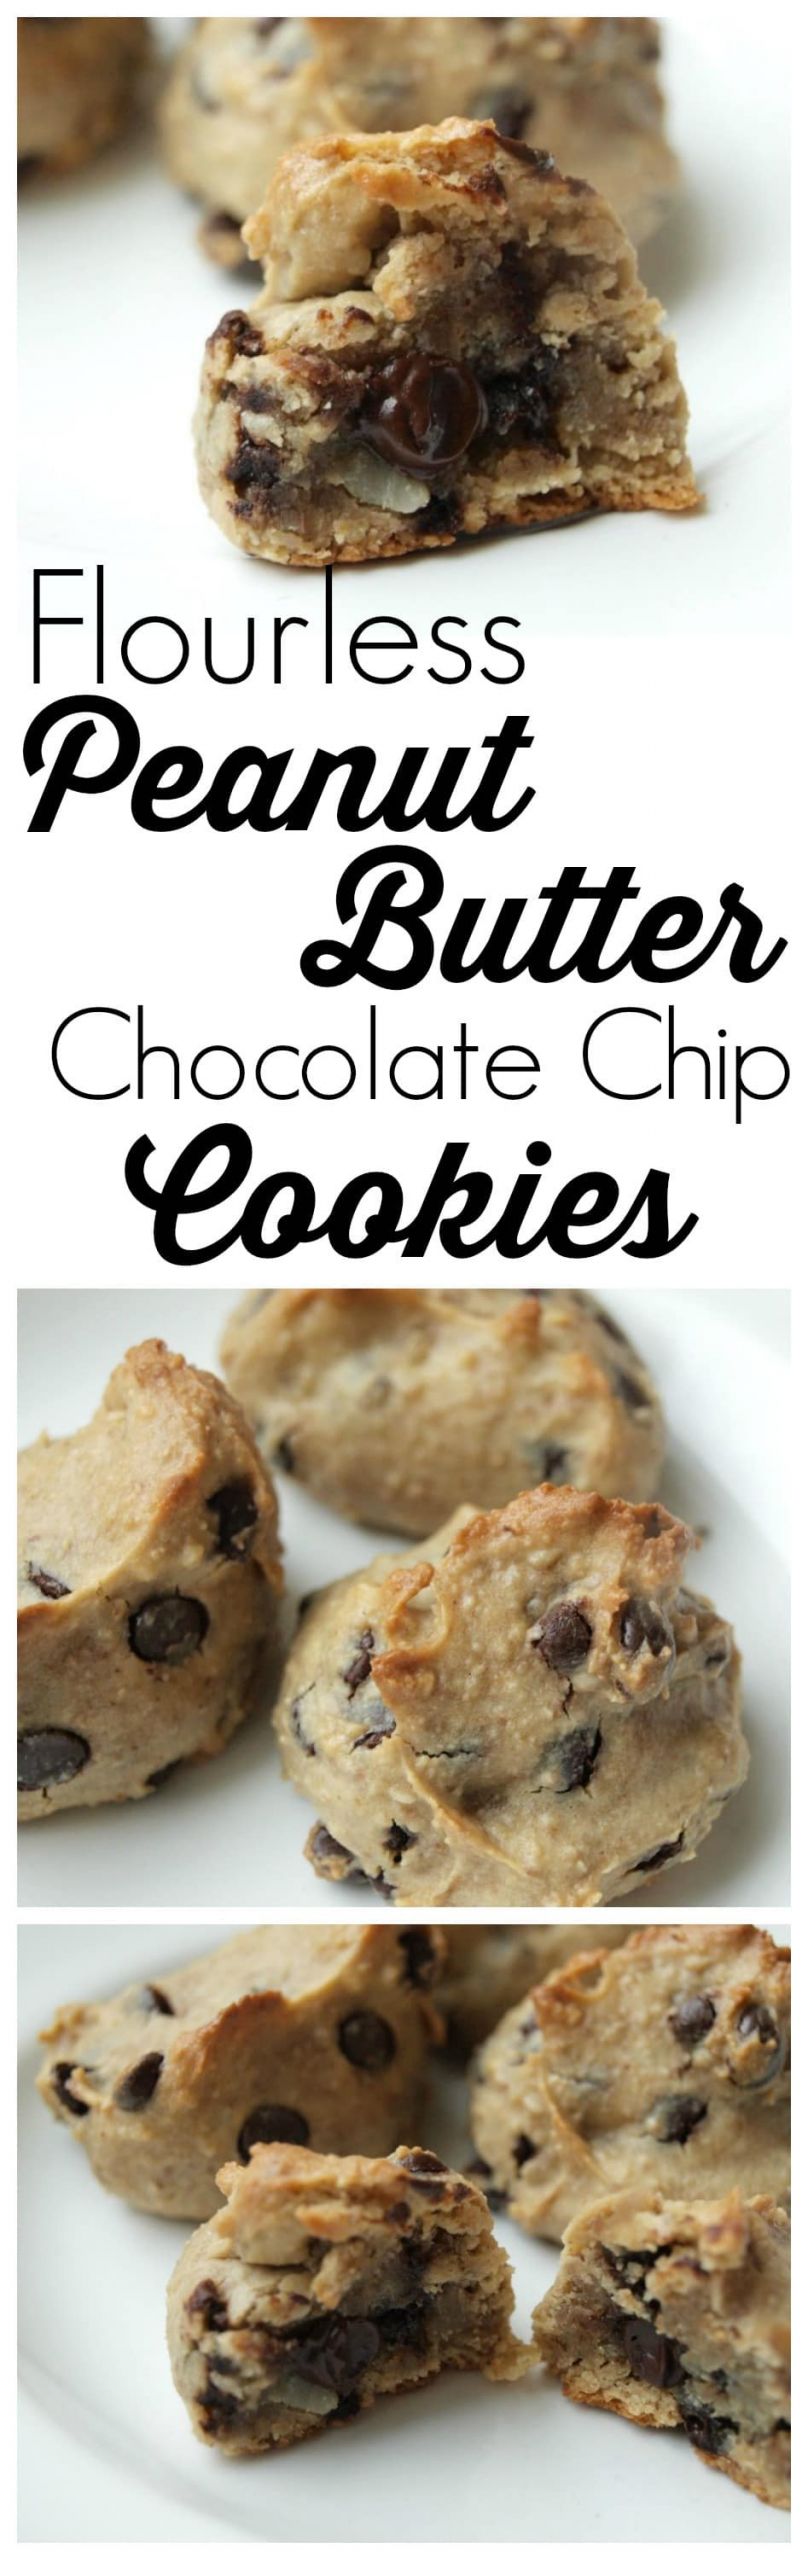 Reese'S Peanut Butter Chip Cookies
 Grain free peanut butter chocolate chip cookies gluten